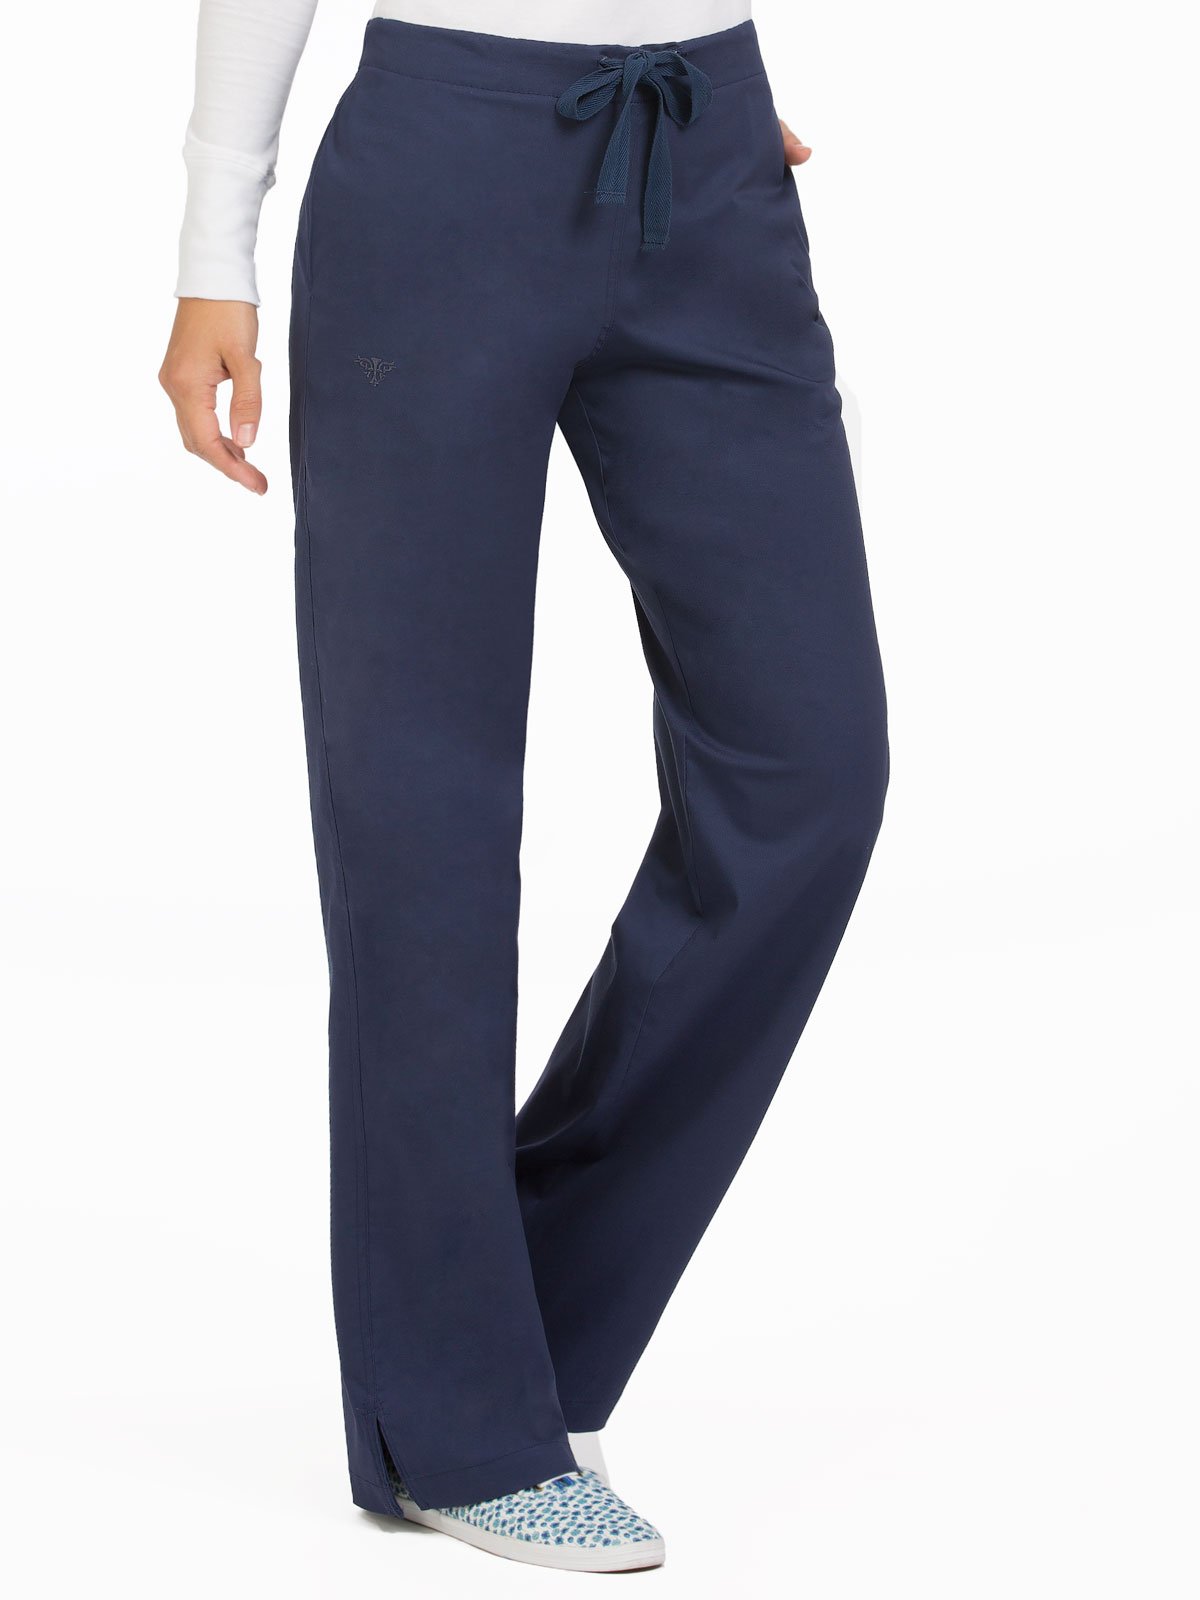 Med Couture Signature Drawstring Pant